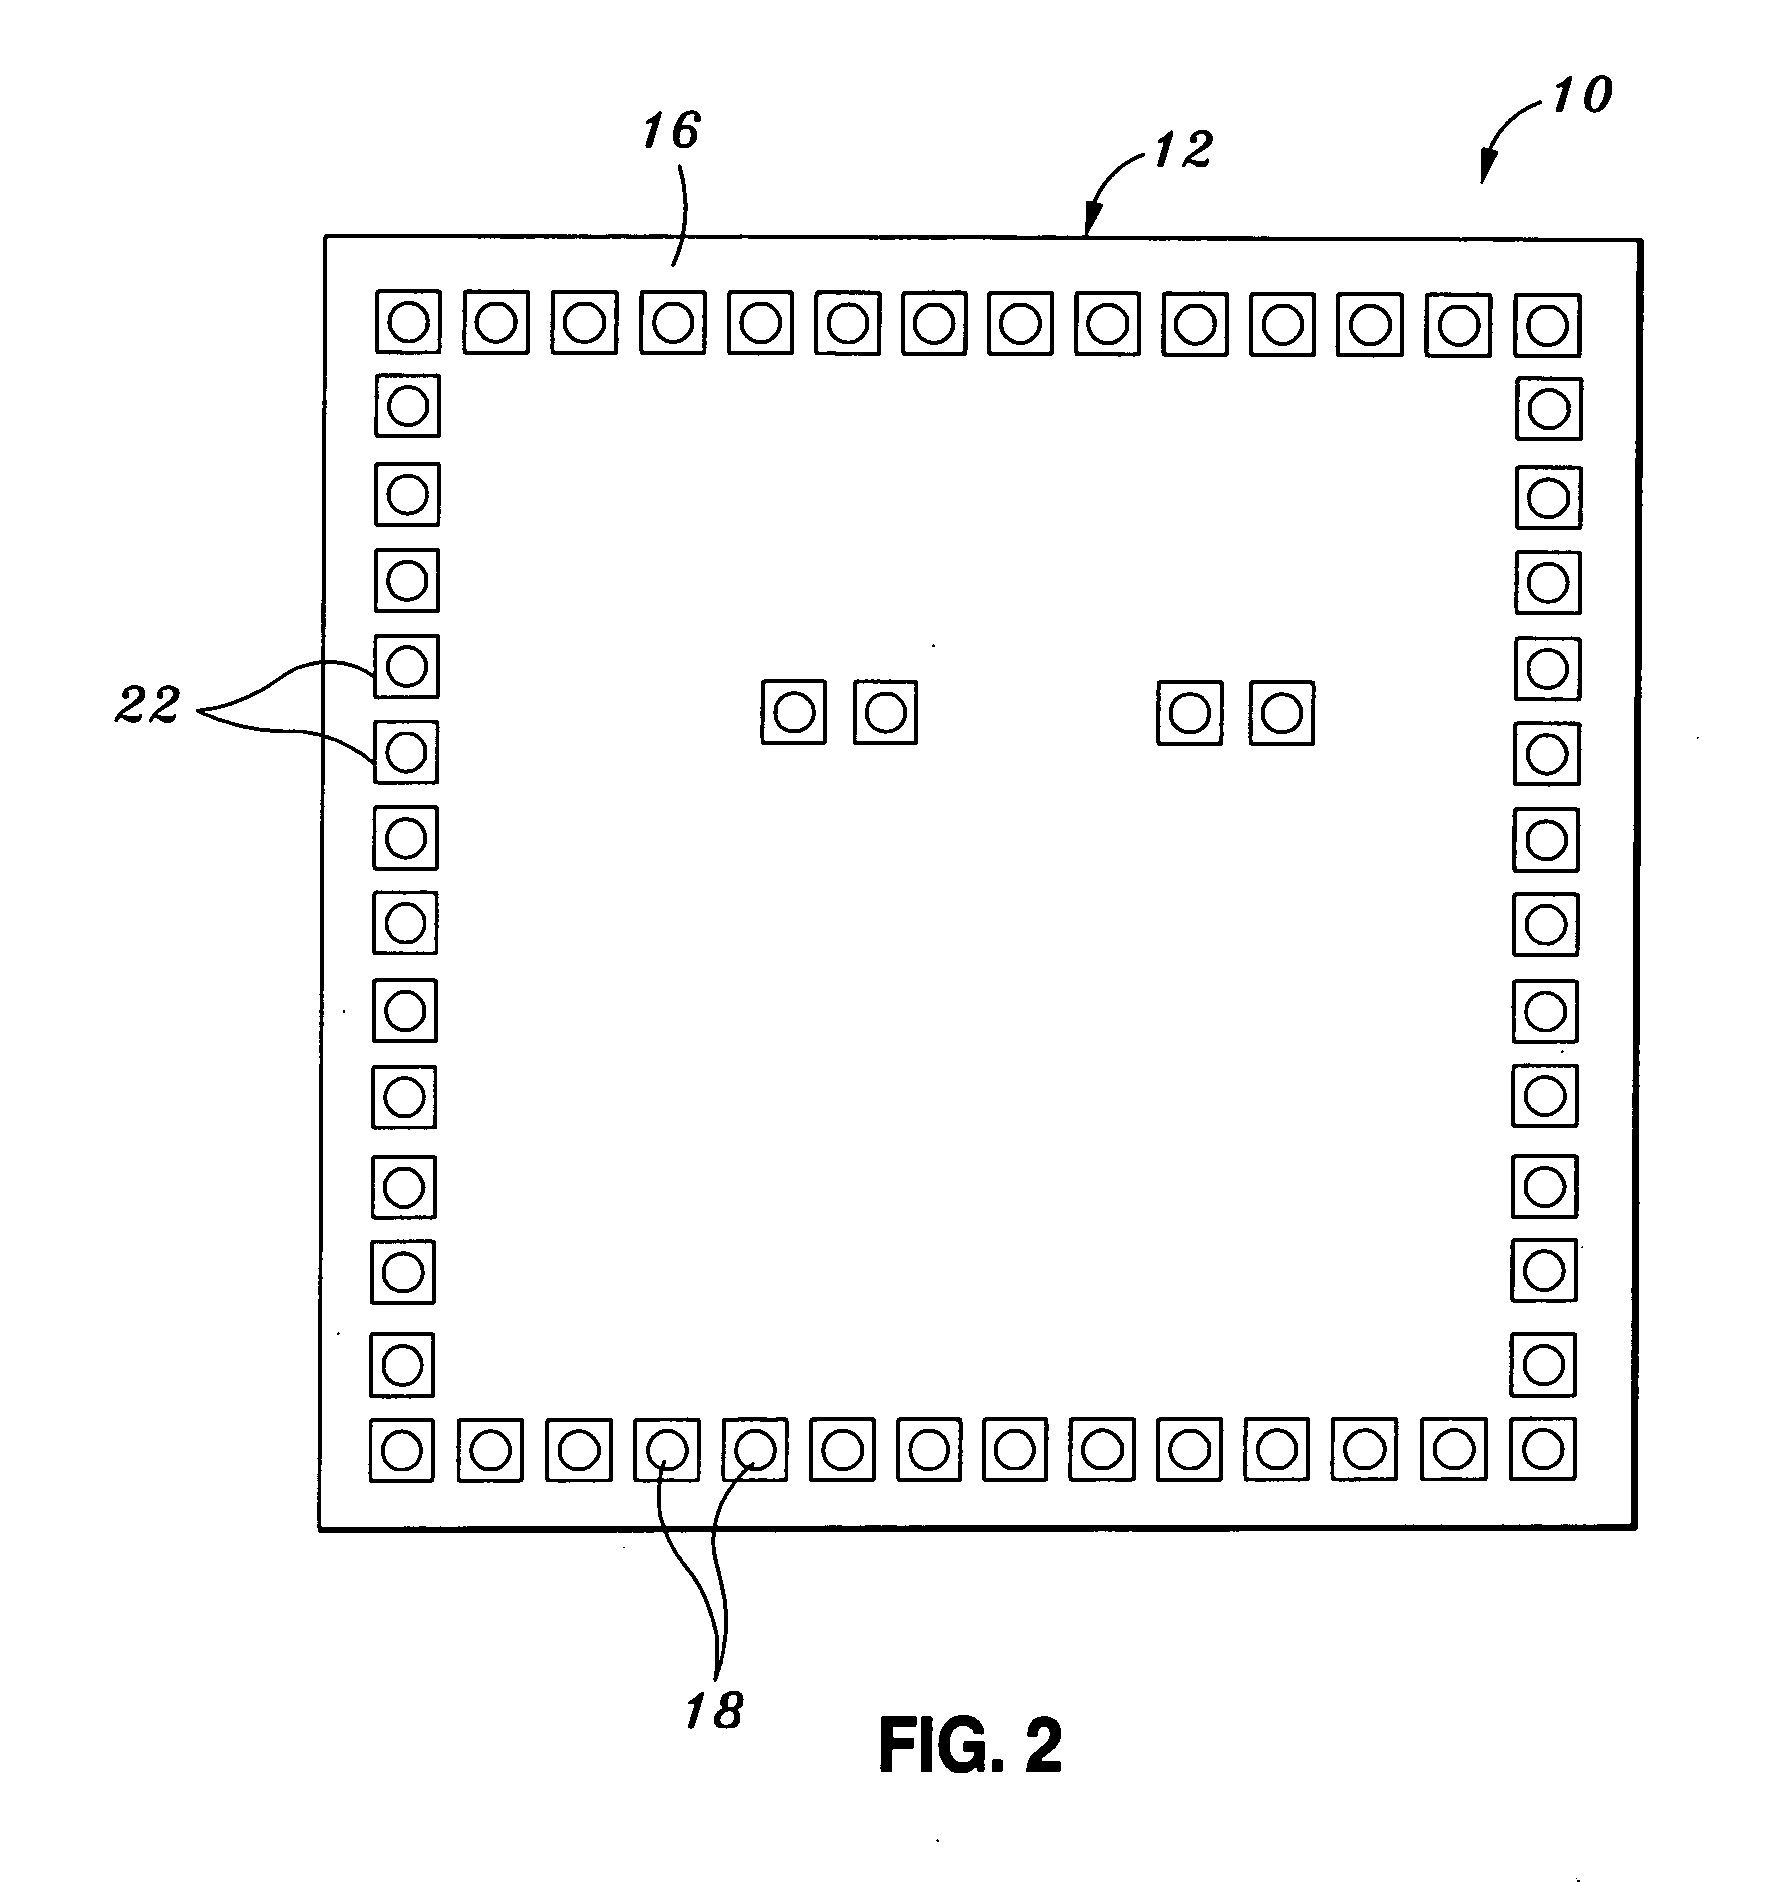 Thin integrated circuit device packages for improved radio frequency performance